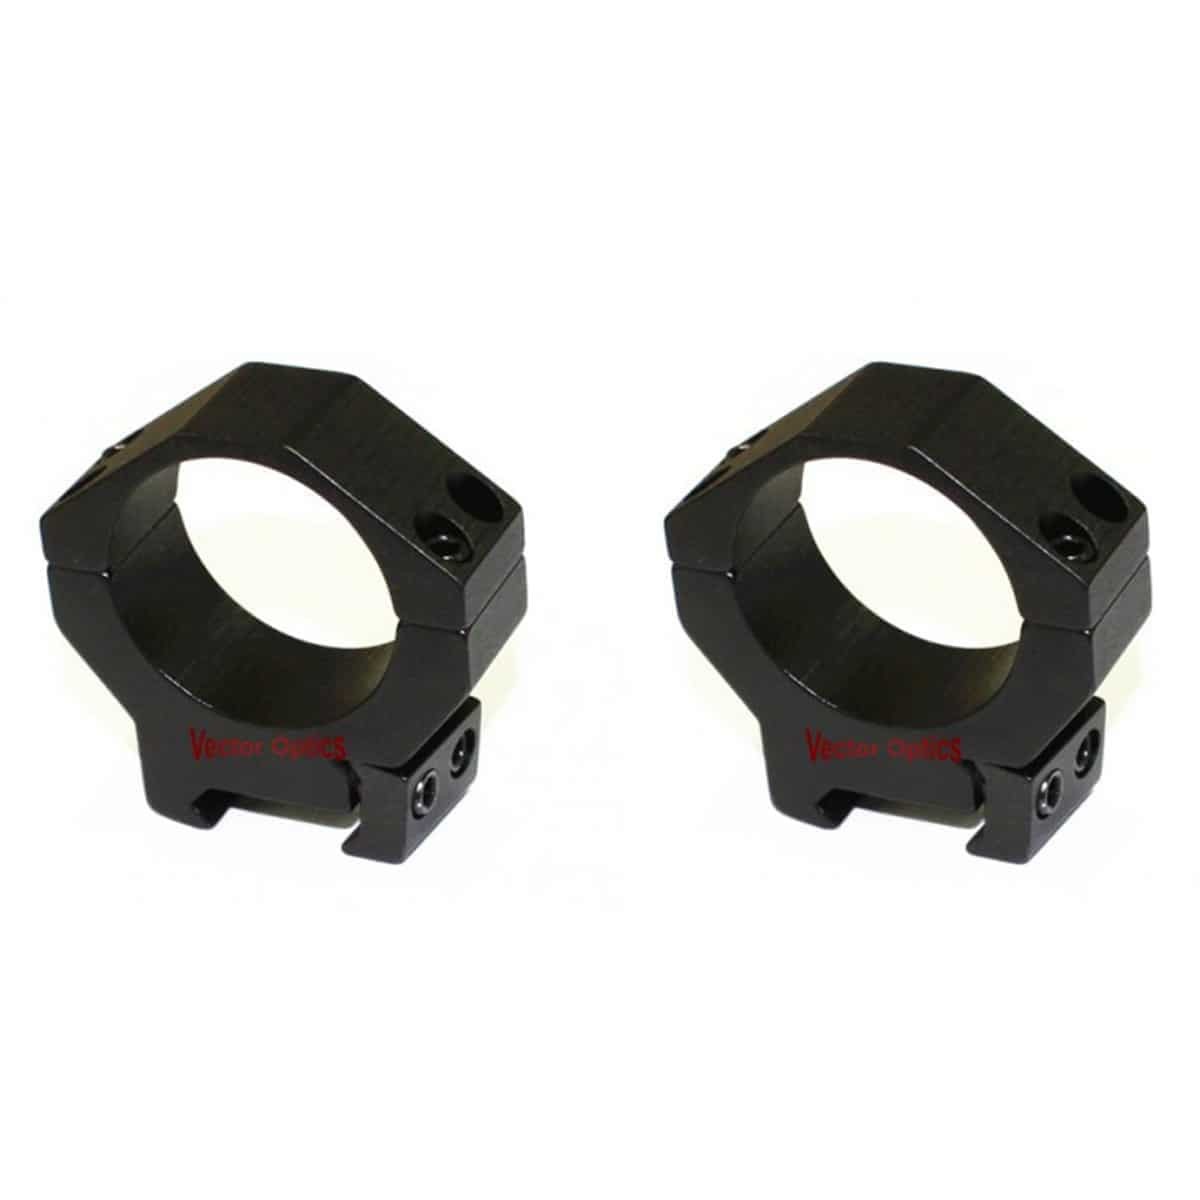 35mm Tactical Low Picatinny Mount Rings